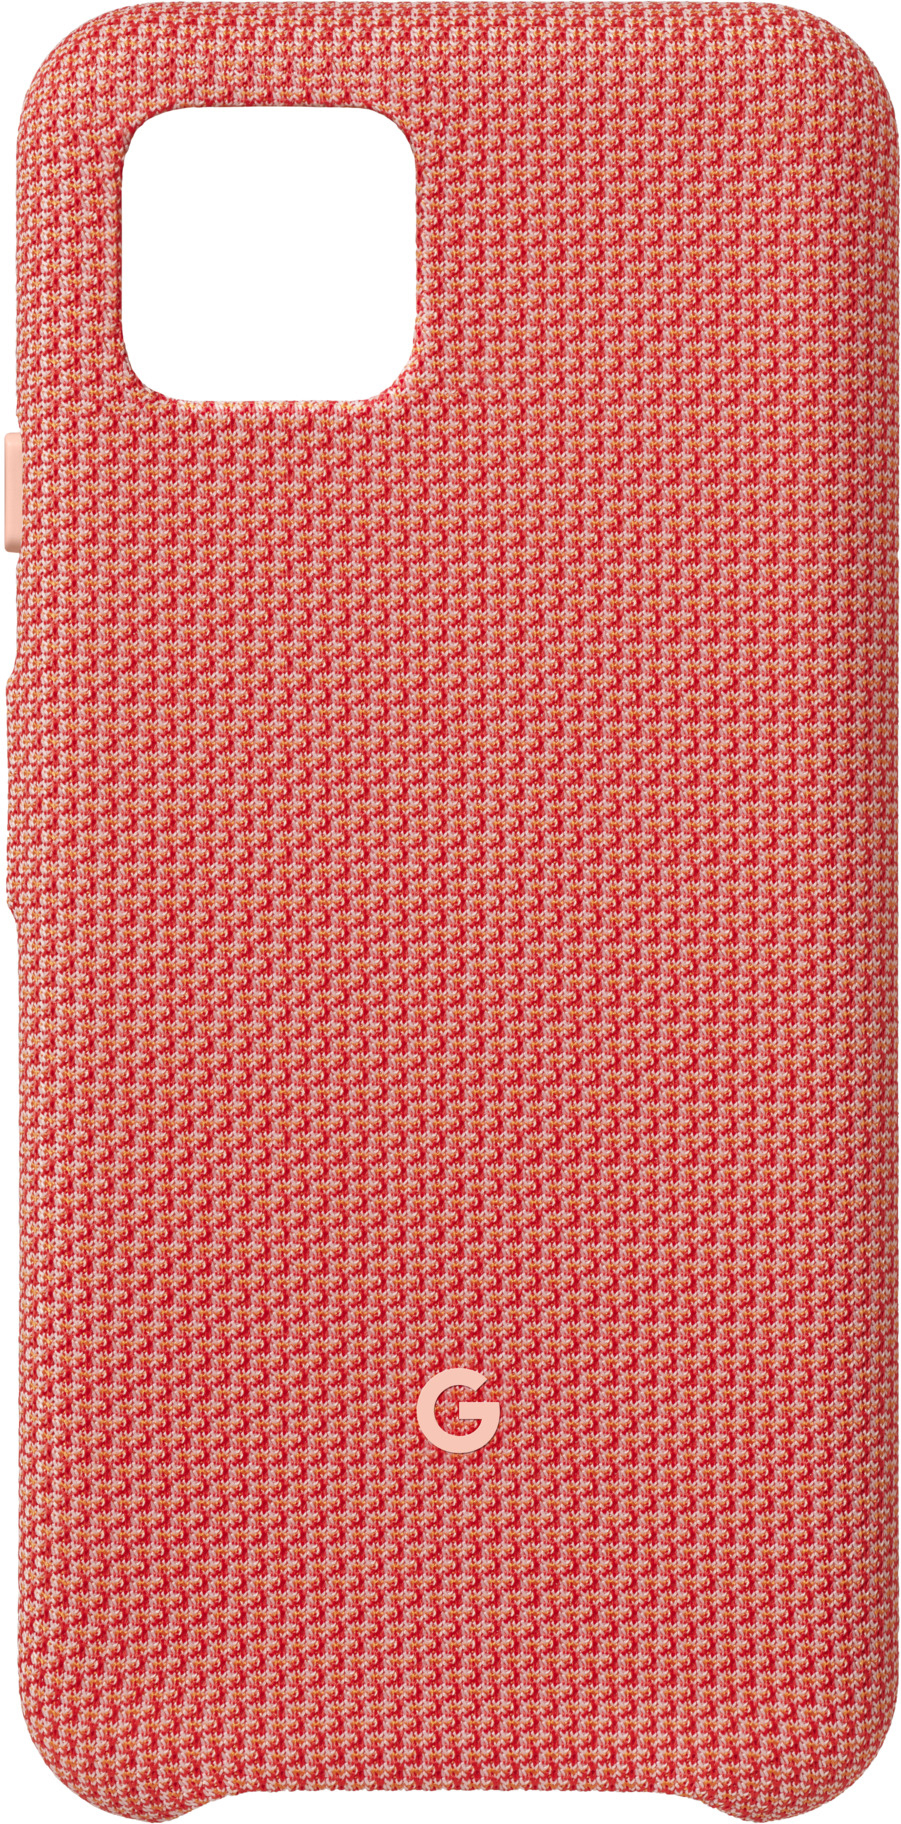 be Coral GA01282, Pixel 4, Could Backcover, Google, GOOGLE